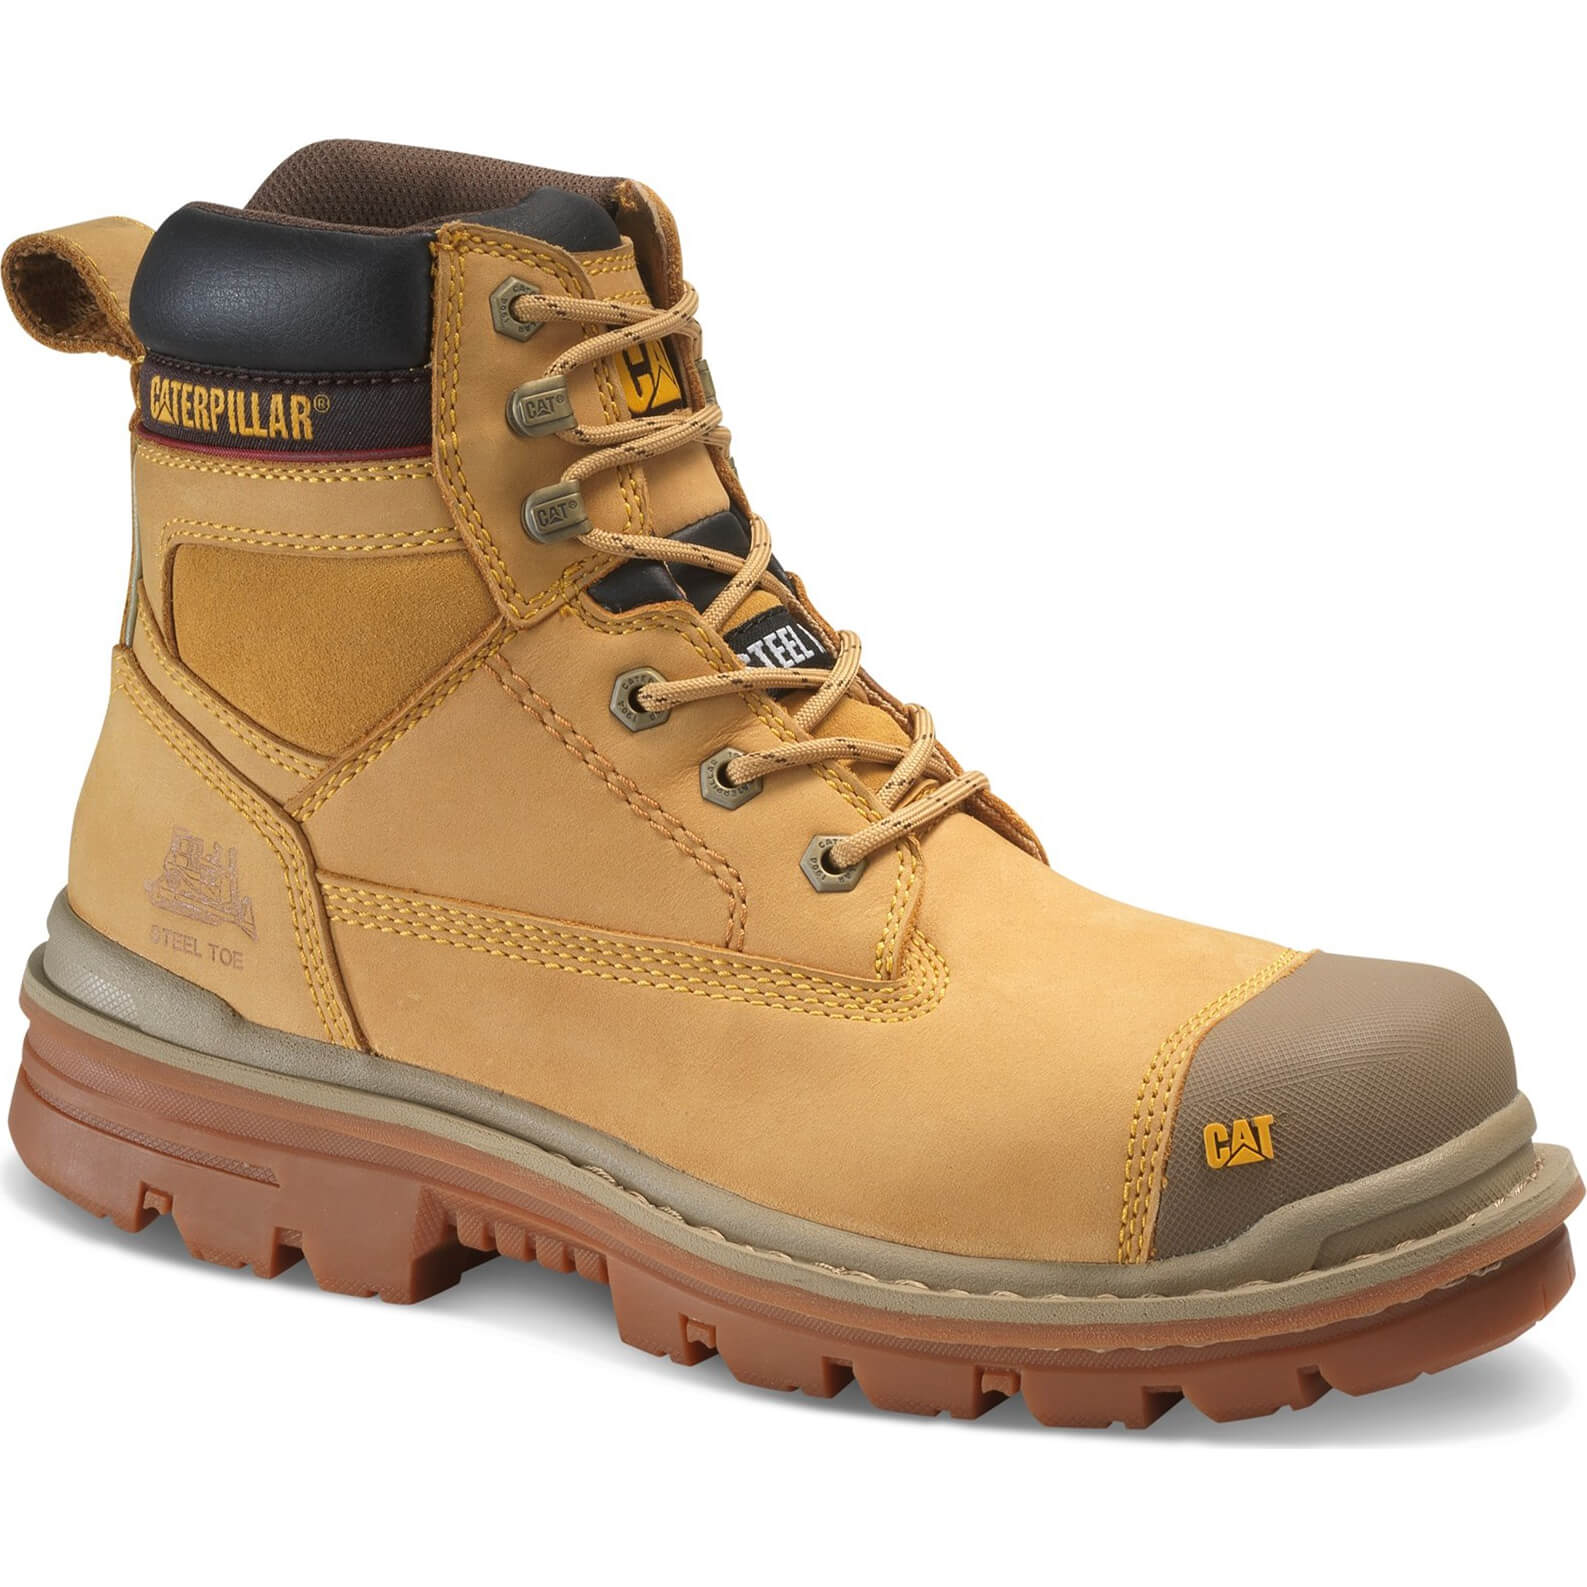 Image of Caterpillar Mens Gravel Safety Boots Honey Size 8